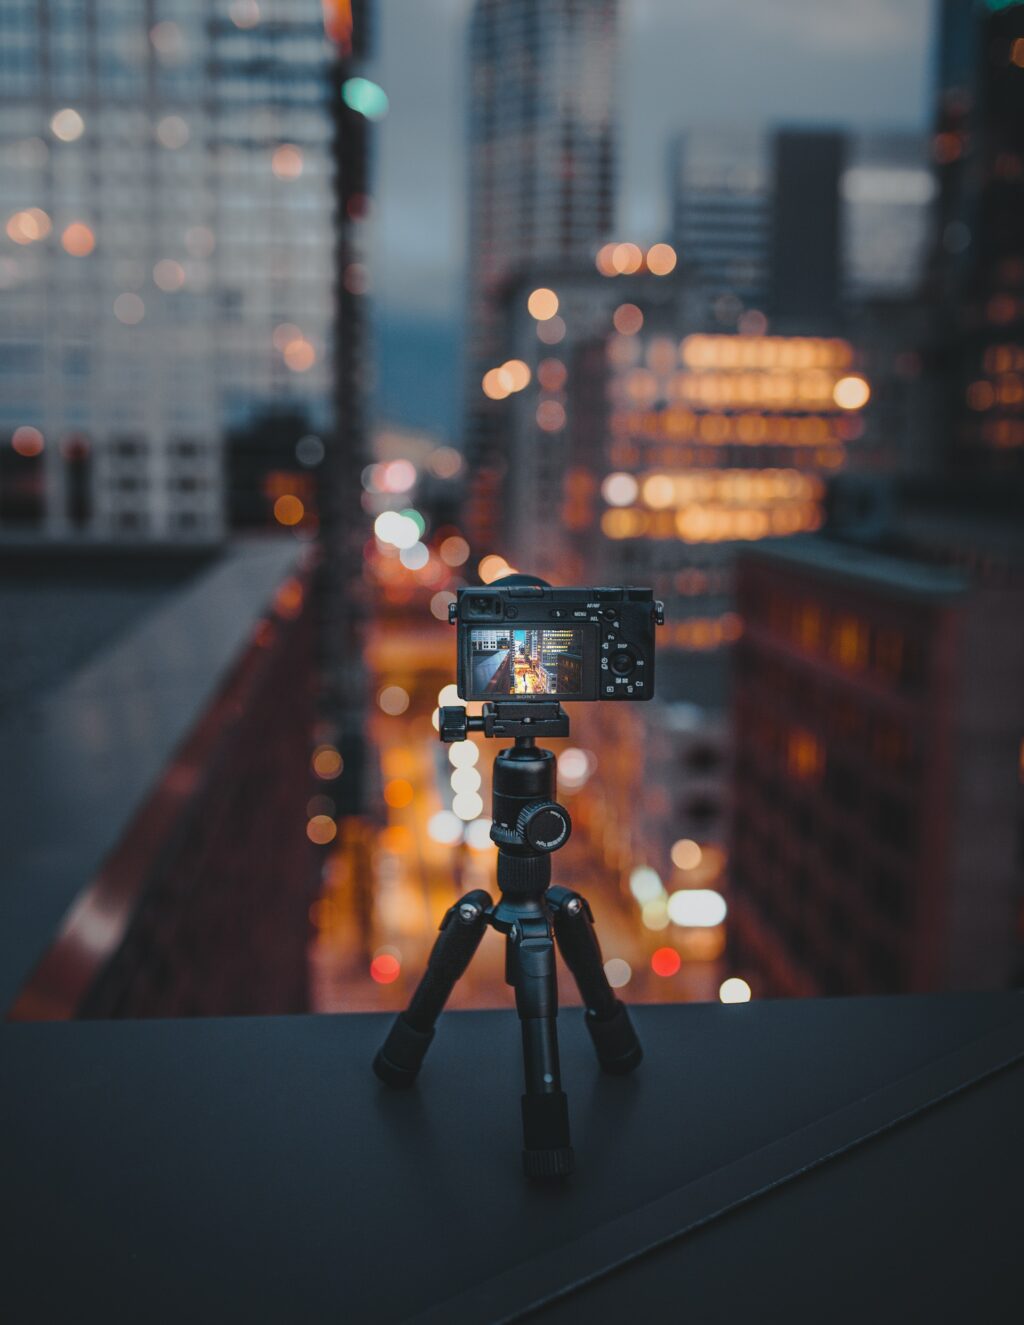 time-lapse photography